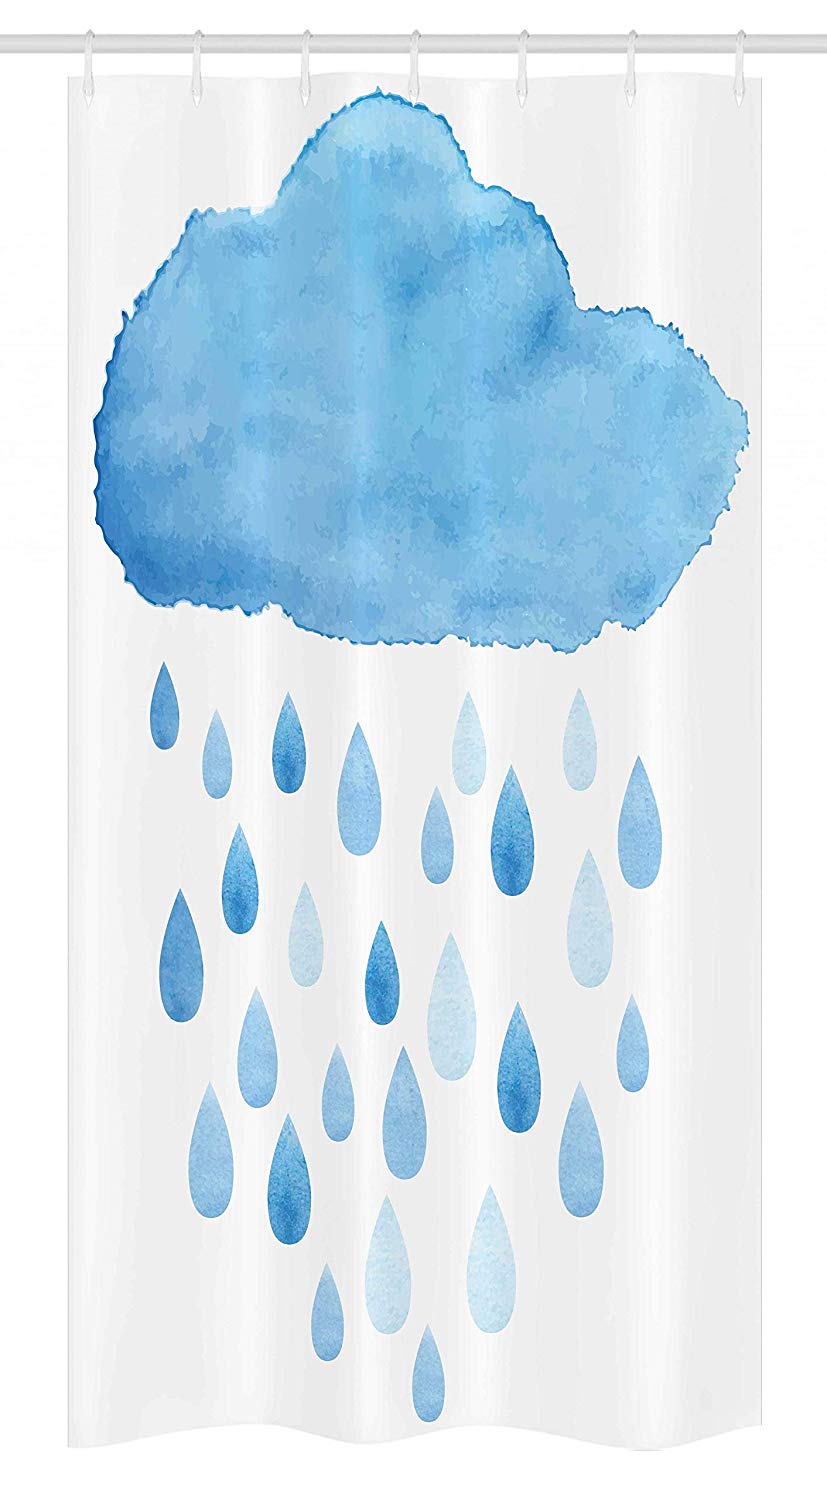 Ambesonne Nature Stall Shower Curtain, Rain Drops and Cloud in Watercolor Painting Effect Nimbus Fun Art Illustration, Fabric Bathroom Decor Set with Hooks, 36